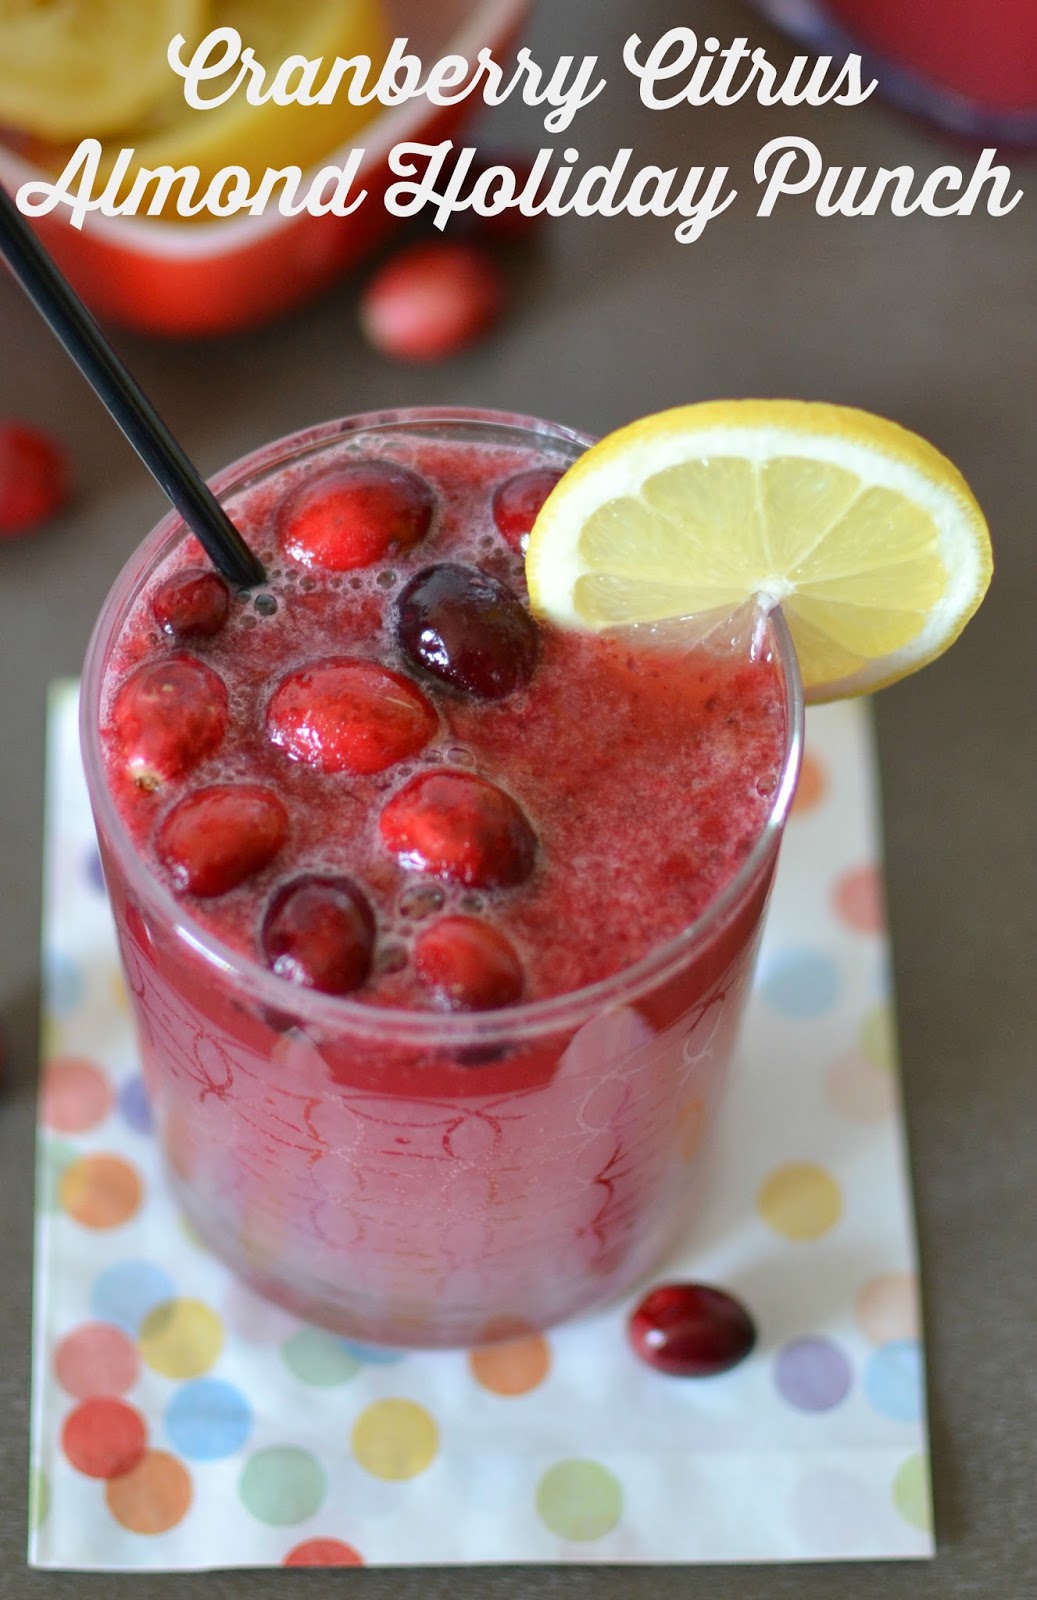 Hot Eats and Cool Reads: Cranberry Citrus Almond Holiday Punch Recipe